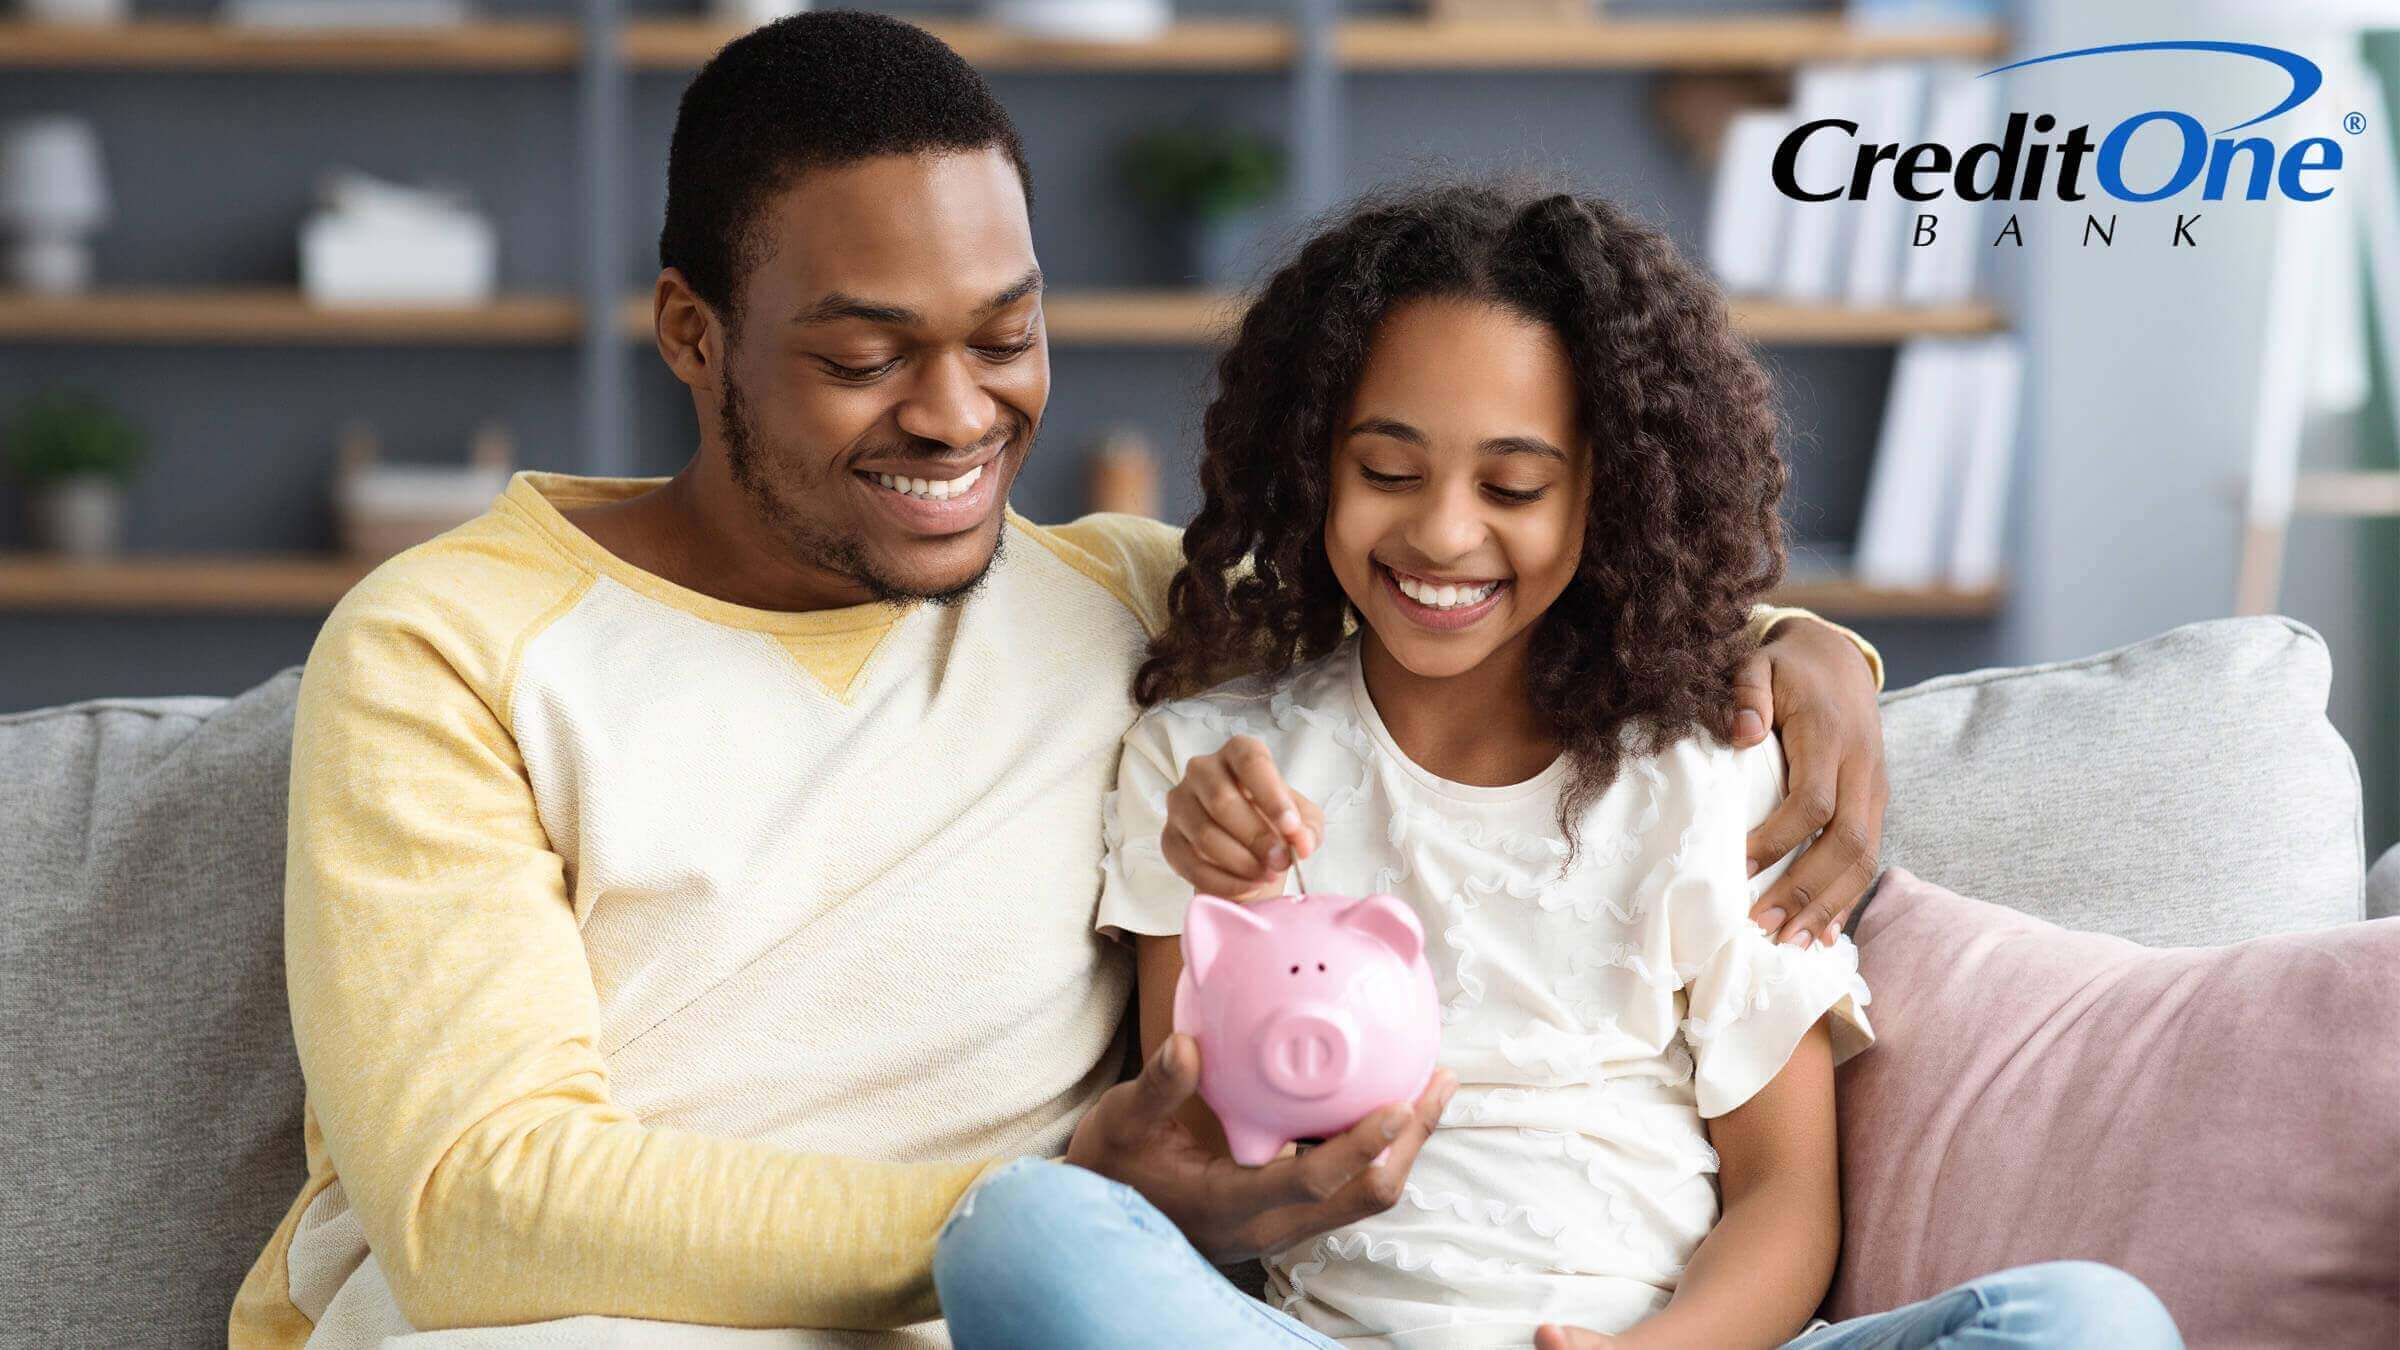 A father teaches his daughter about financial literacy as they sit on the couch and put coins in her piggy bank